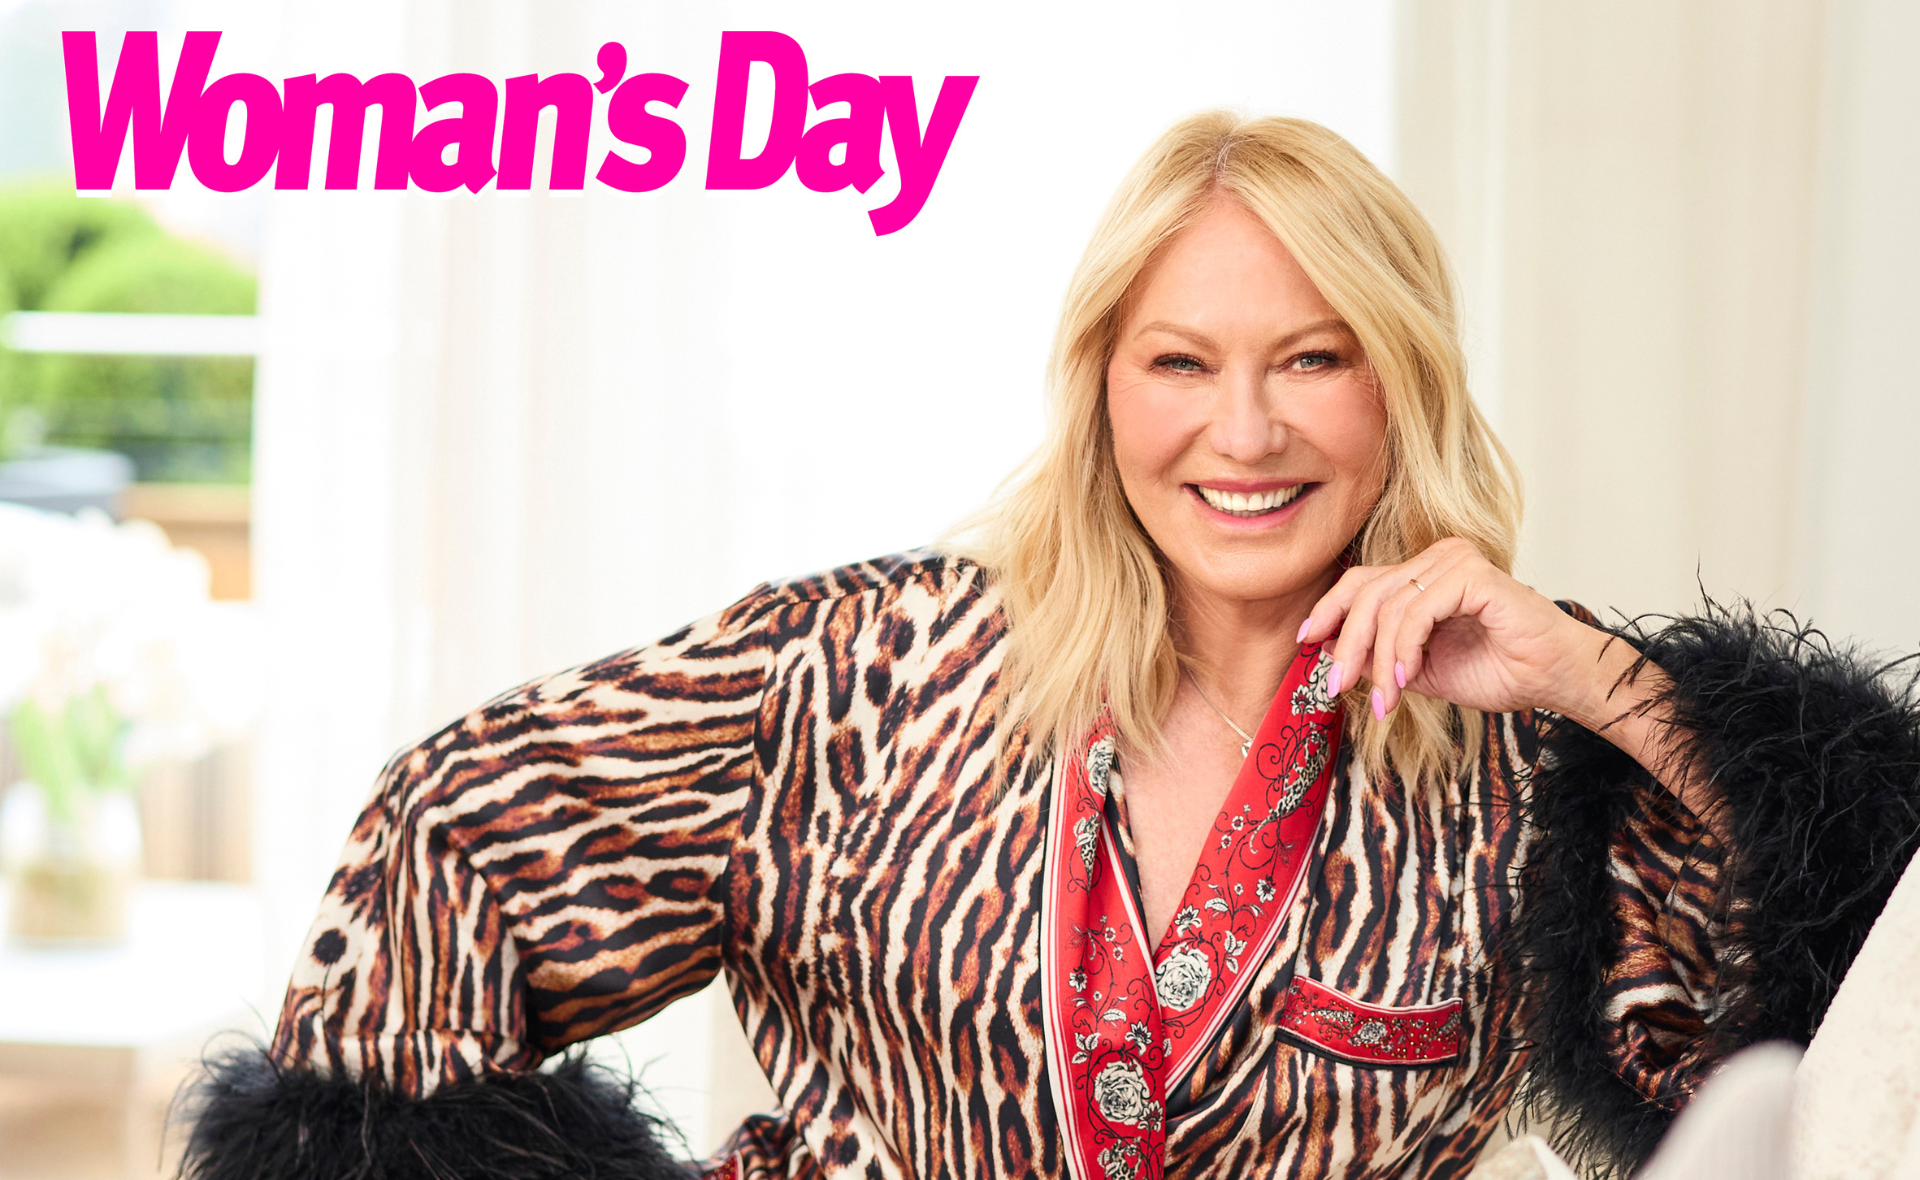 After denying the offer for 12 years, Kerri-Anne Kennerley has finally agreed to join the jungle!